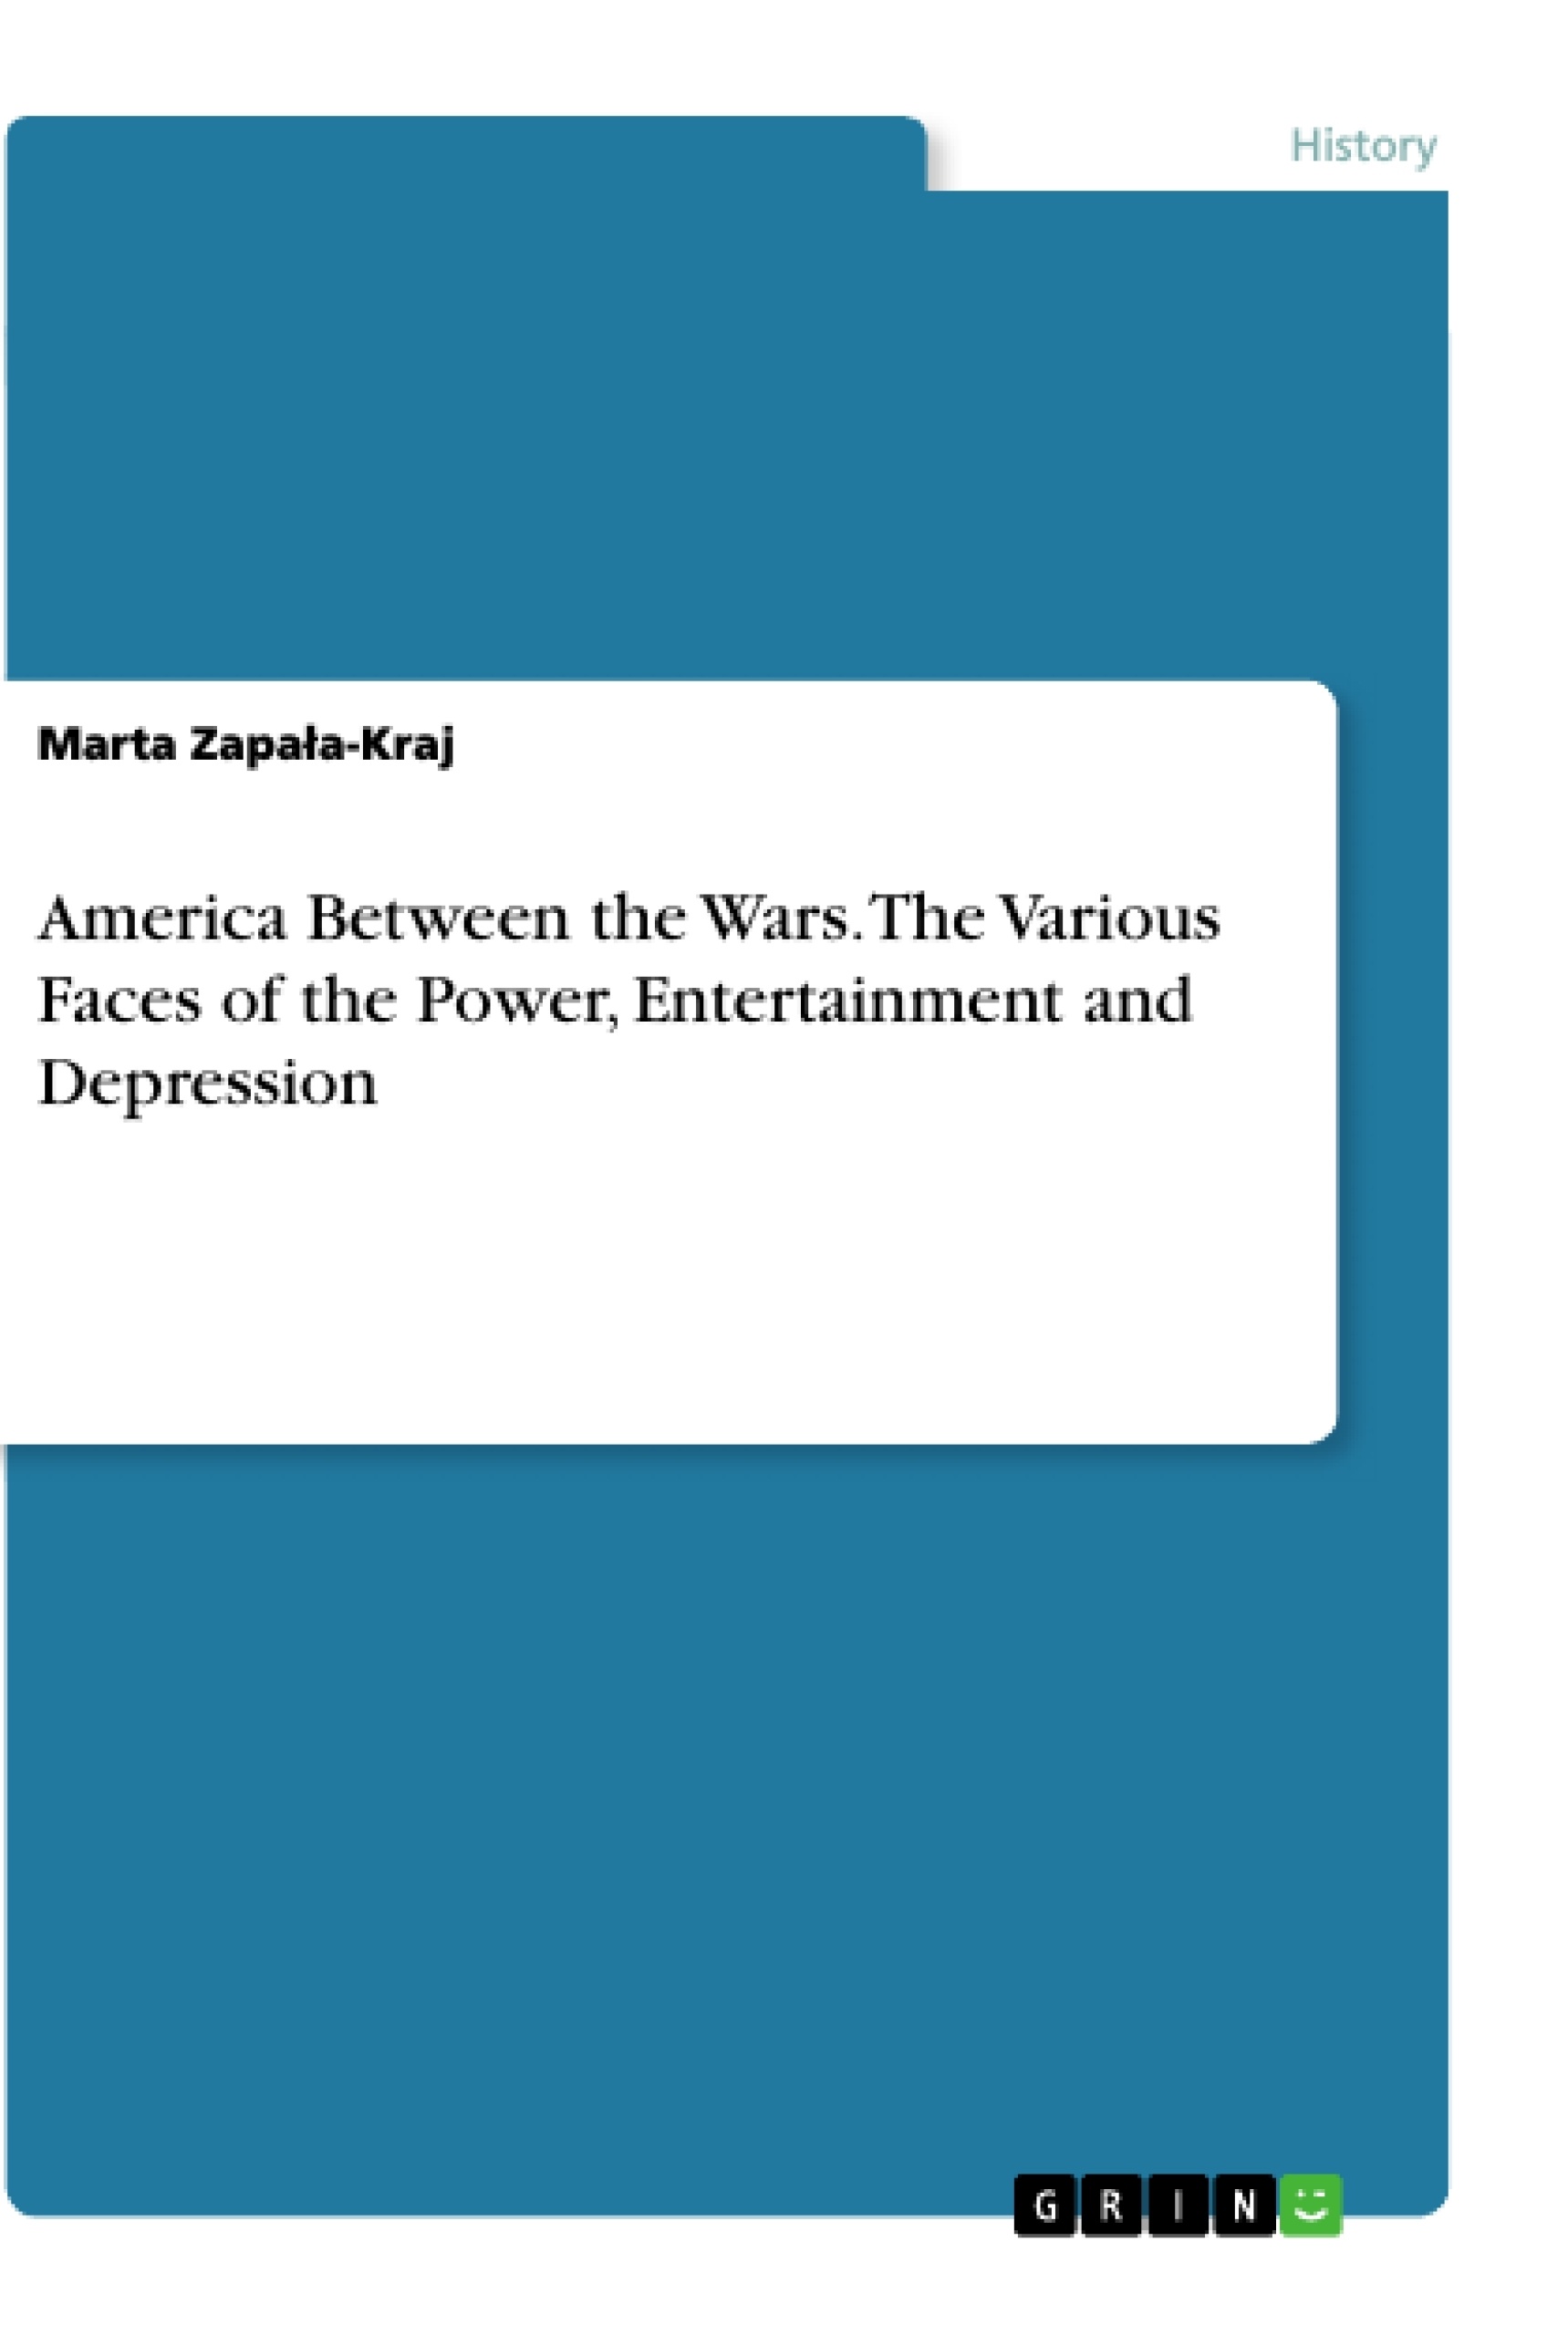 Title: America Between the Wars. The Various Faces of the Power, Entertainment and Depression